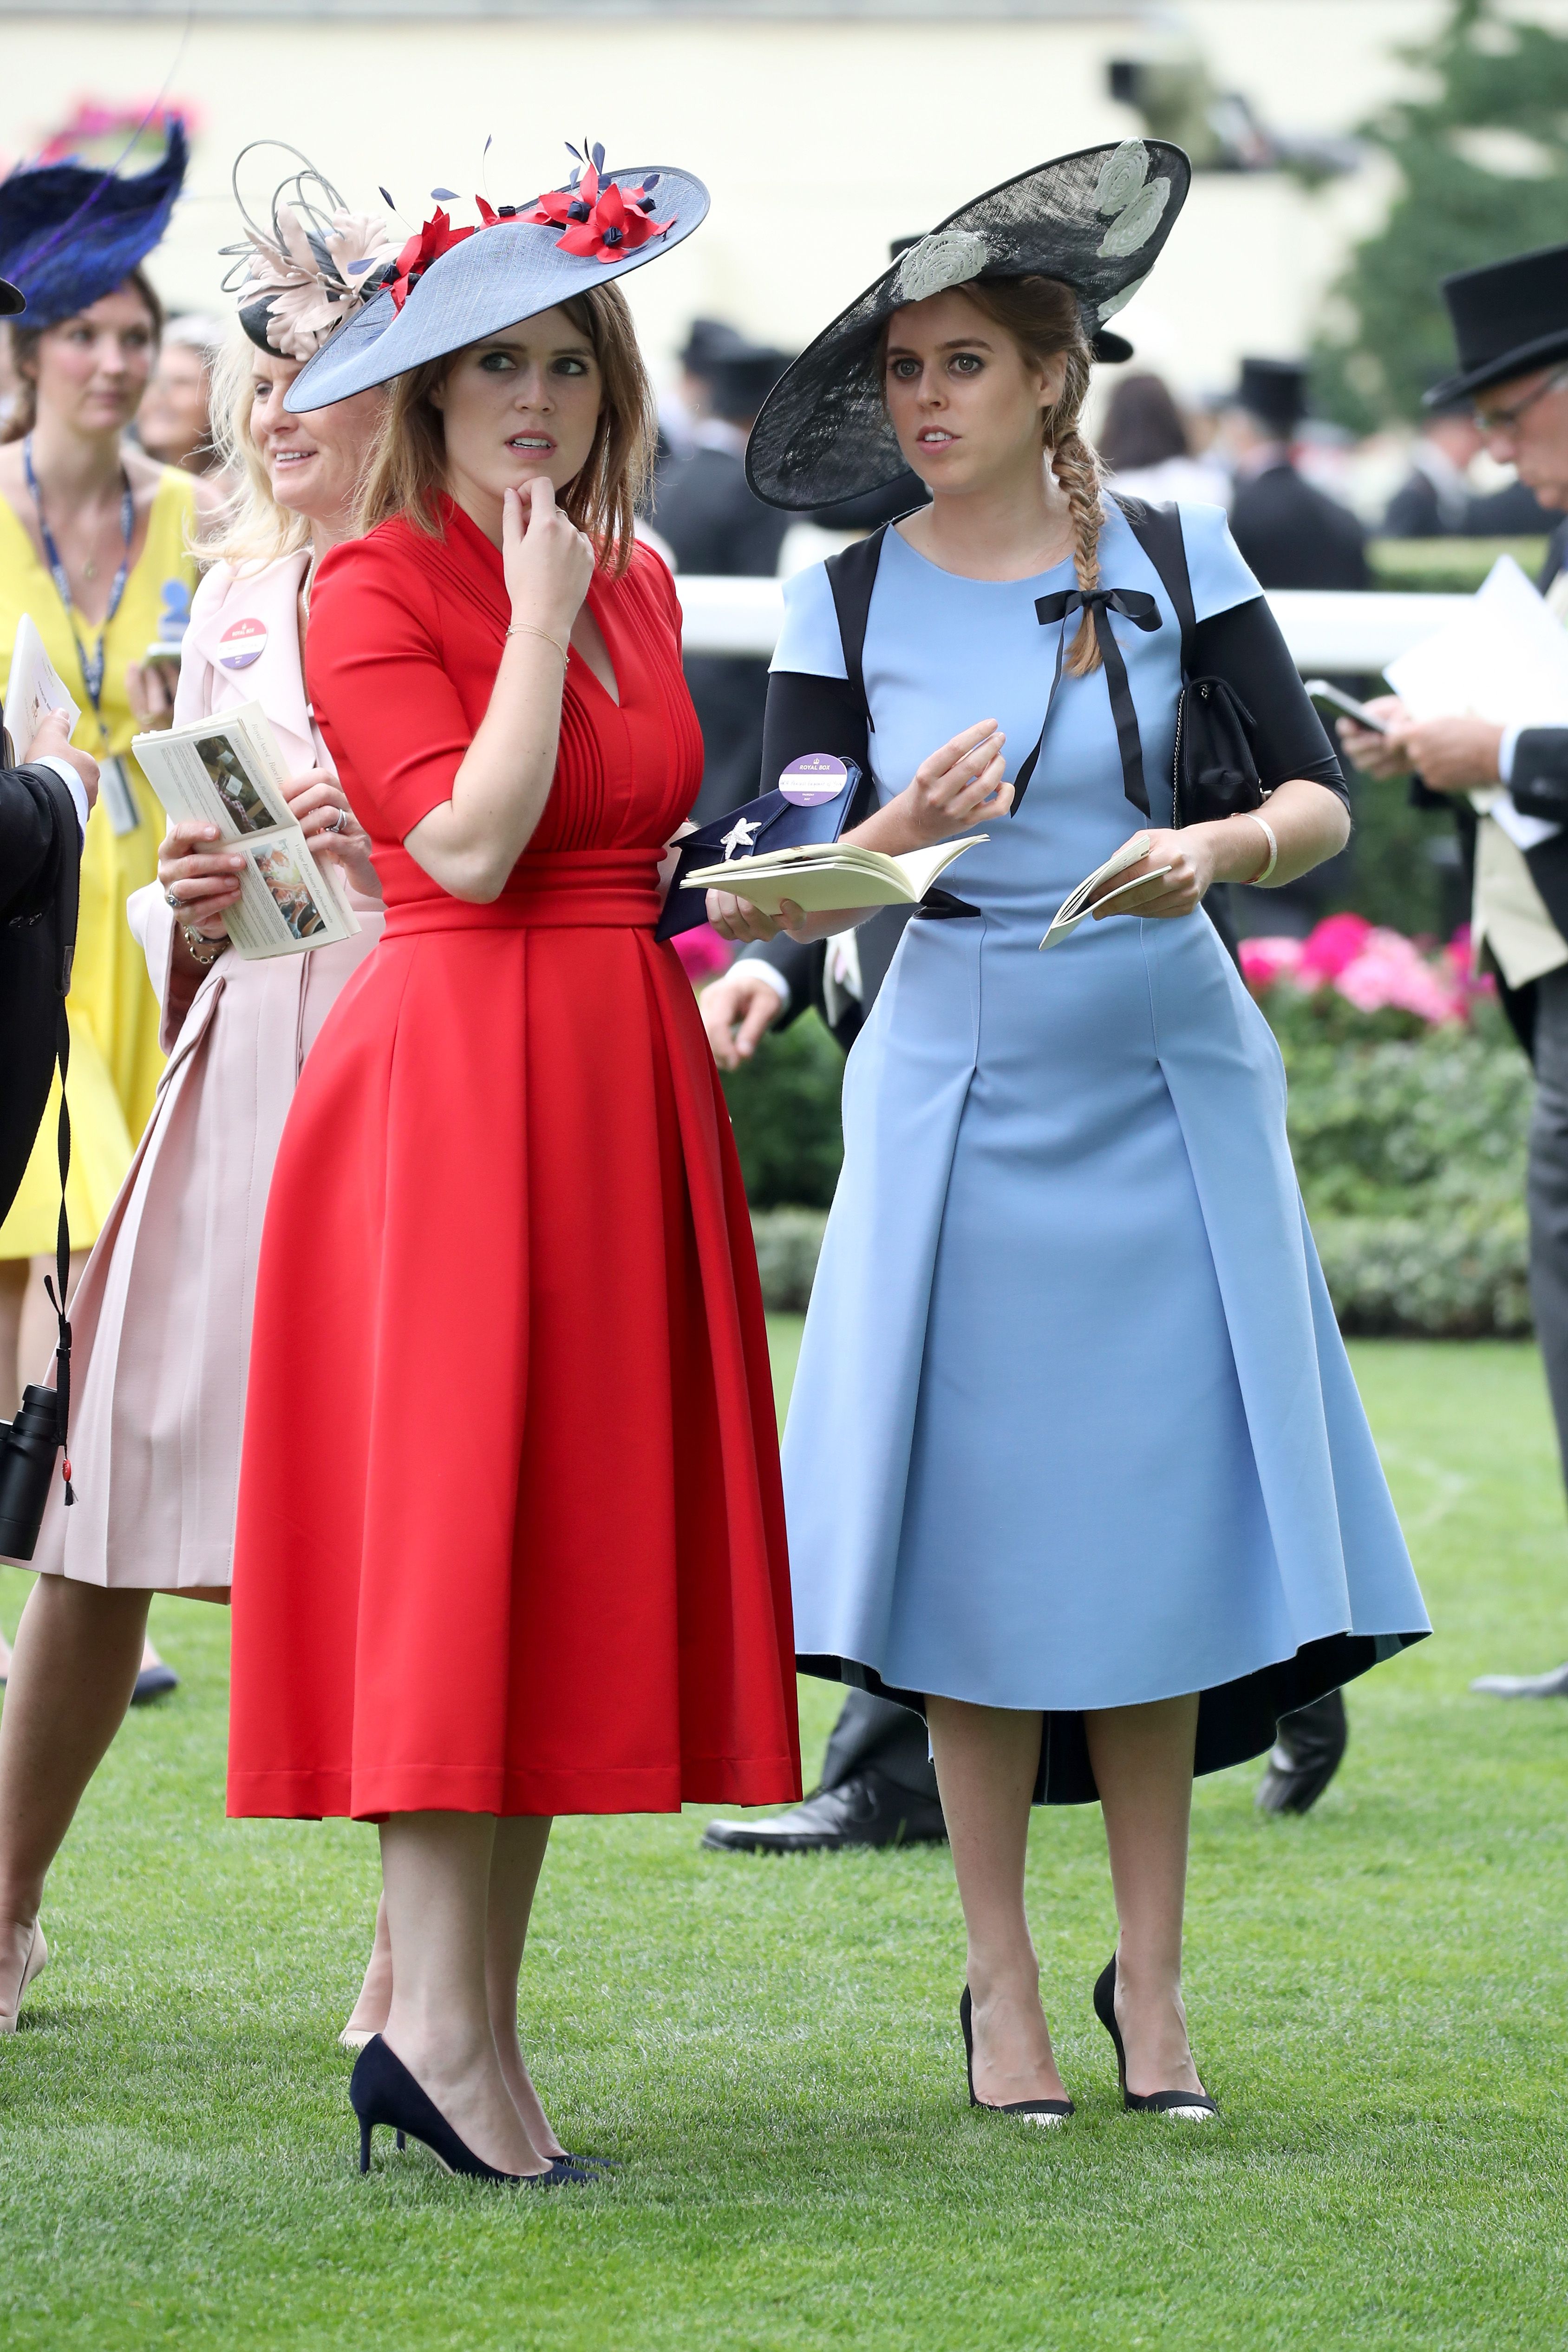 Princess Eugenie and Princess Beatrice of York at the Ascot Racecourse on June 22, 2017, in England | Photo: Chris Jackson/Getty Images